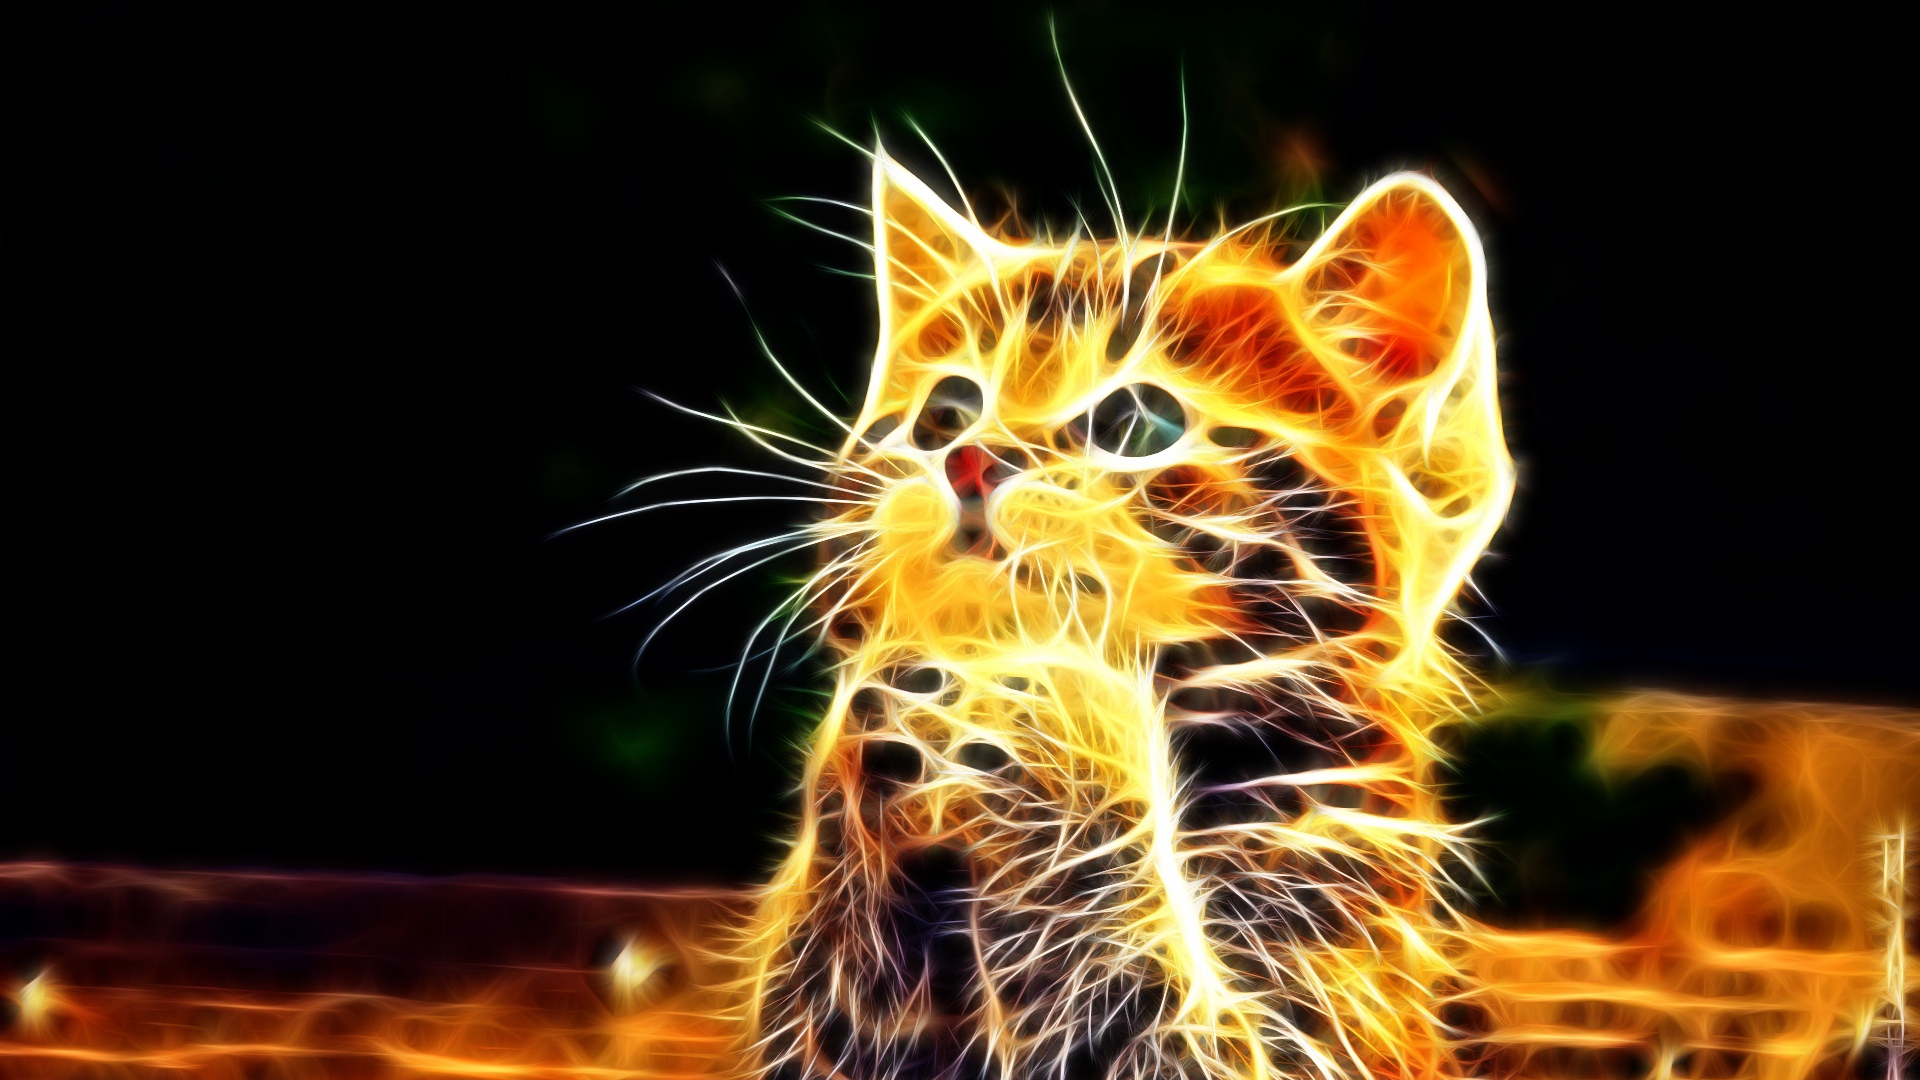 Kitty Furry Paws Cute Abstract Wallpaper Background